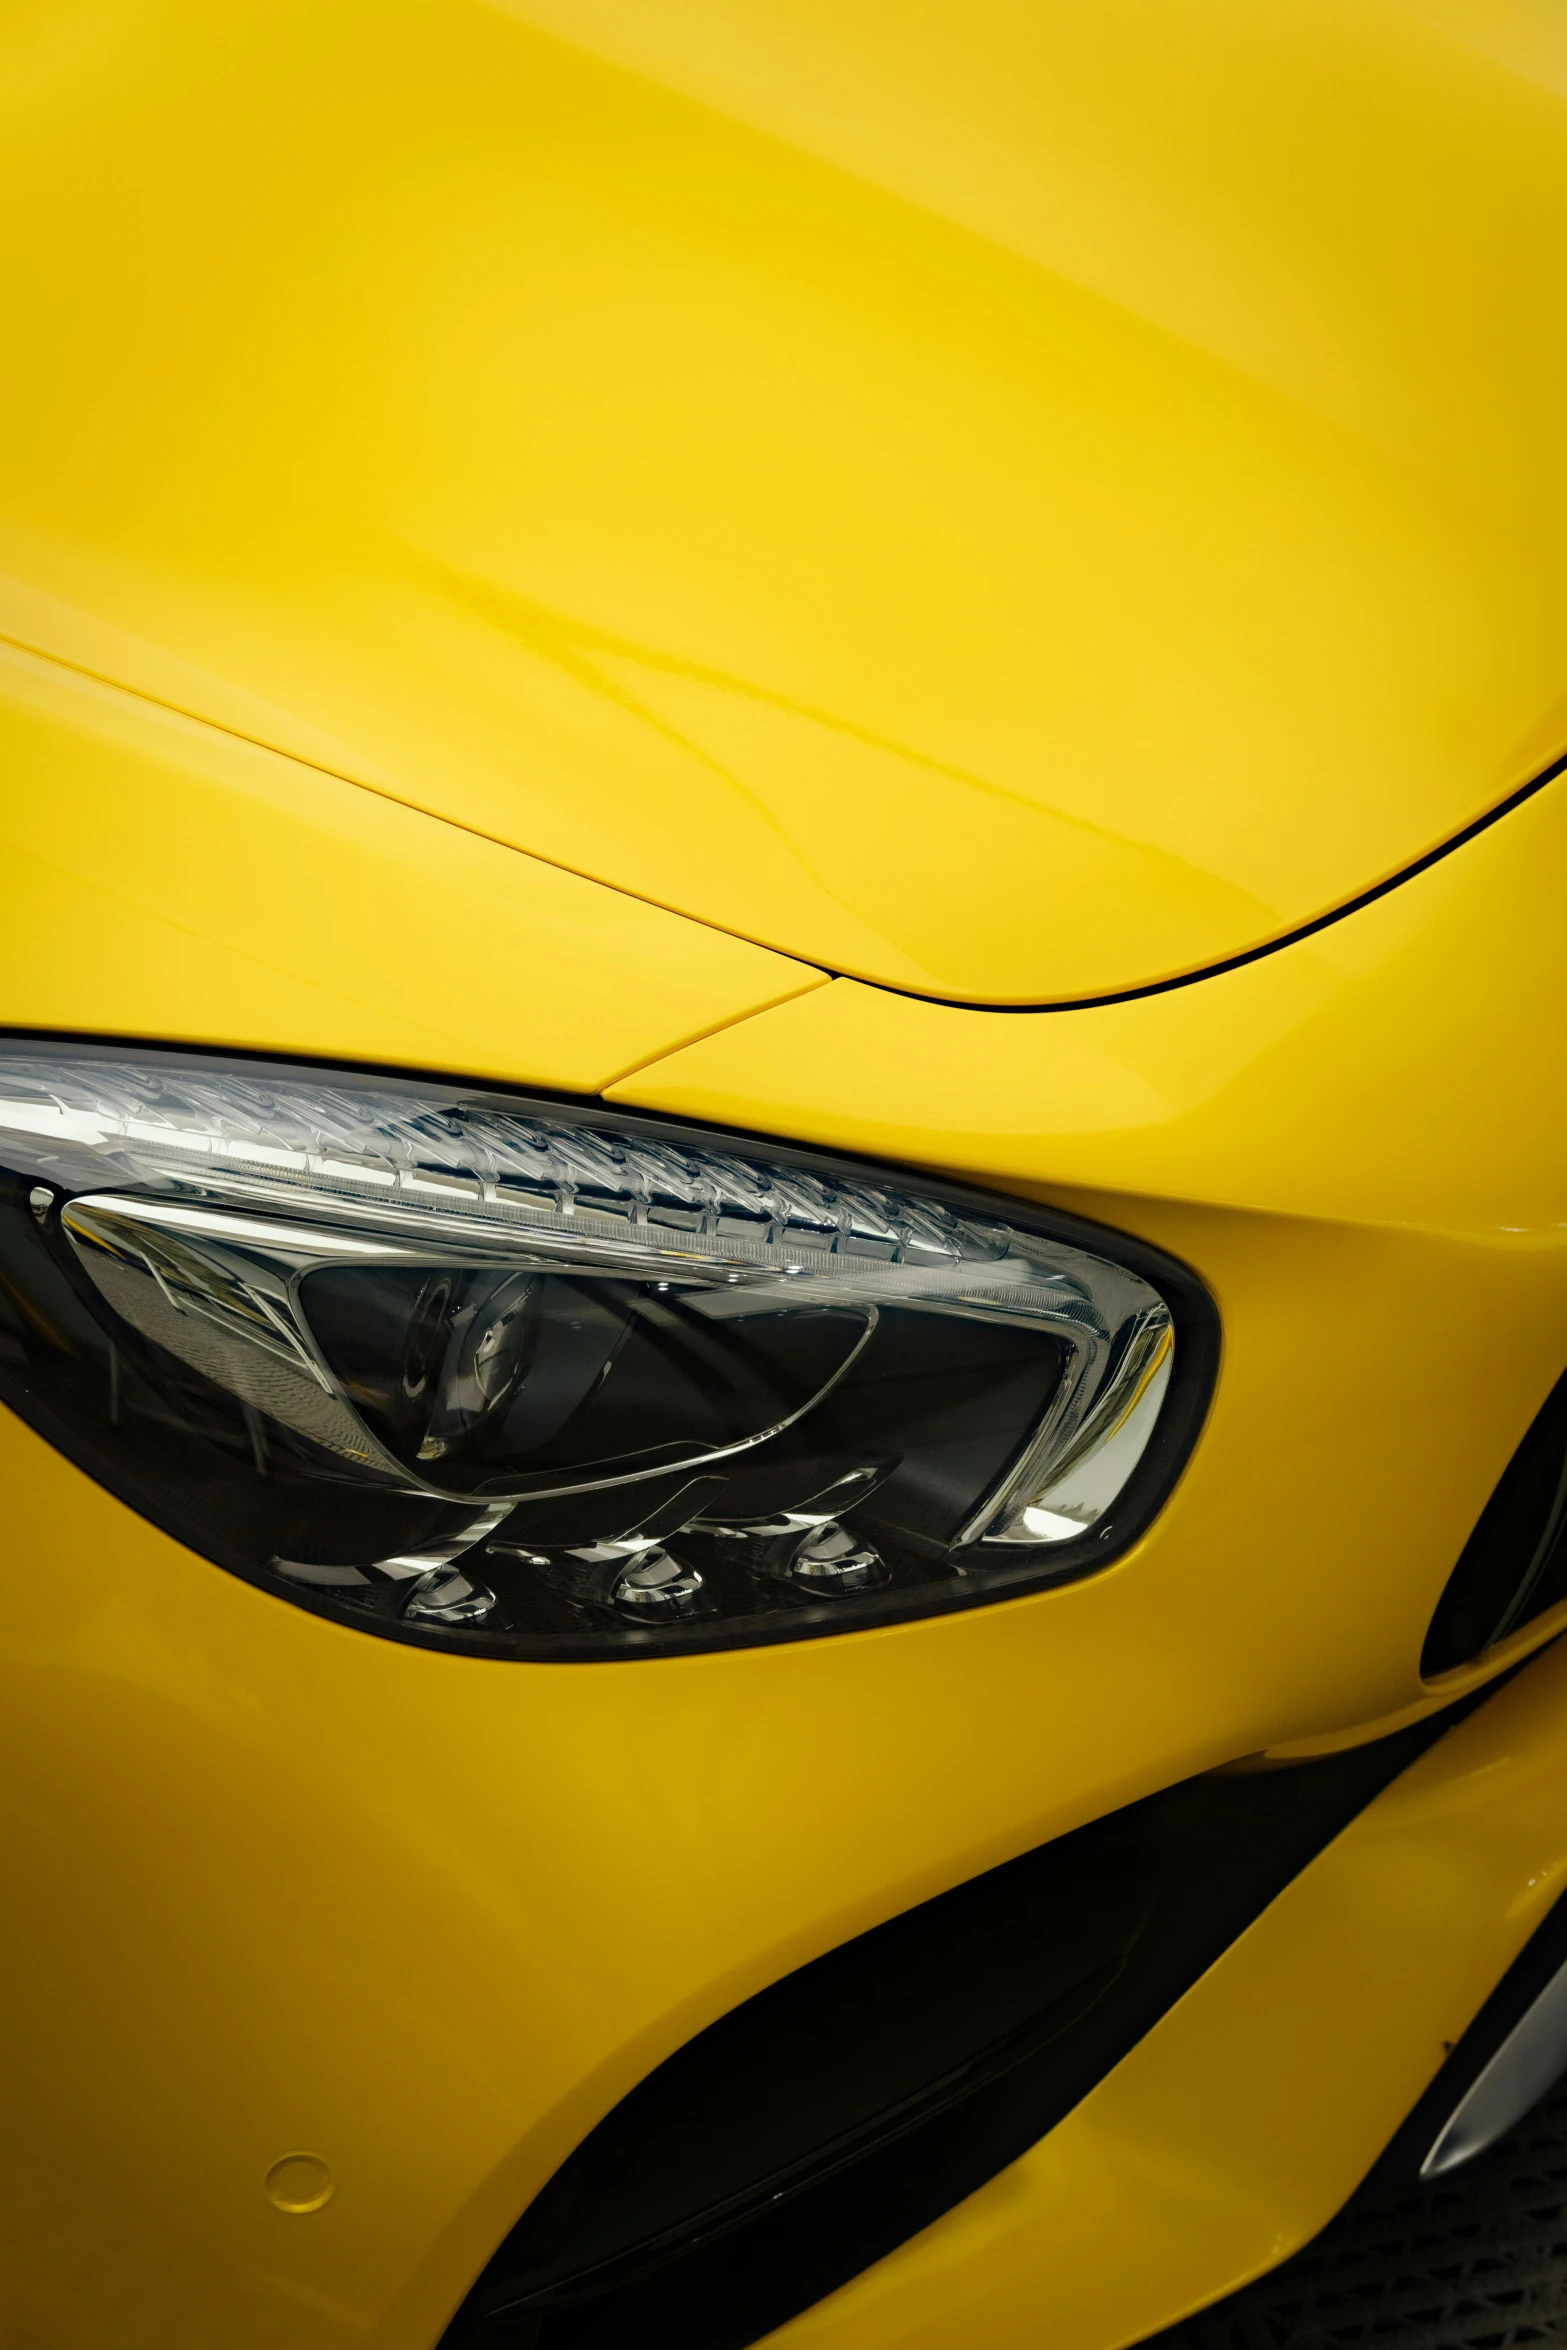 a close up view of the headlight and front end of a car